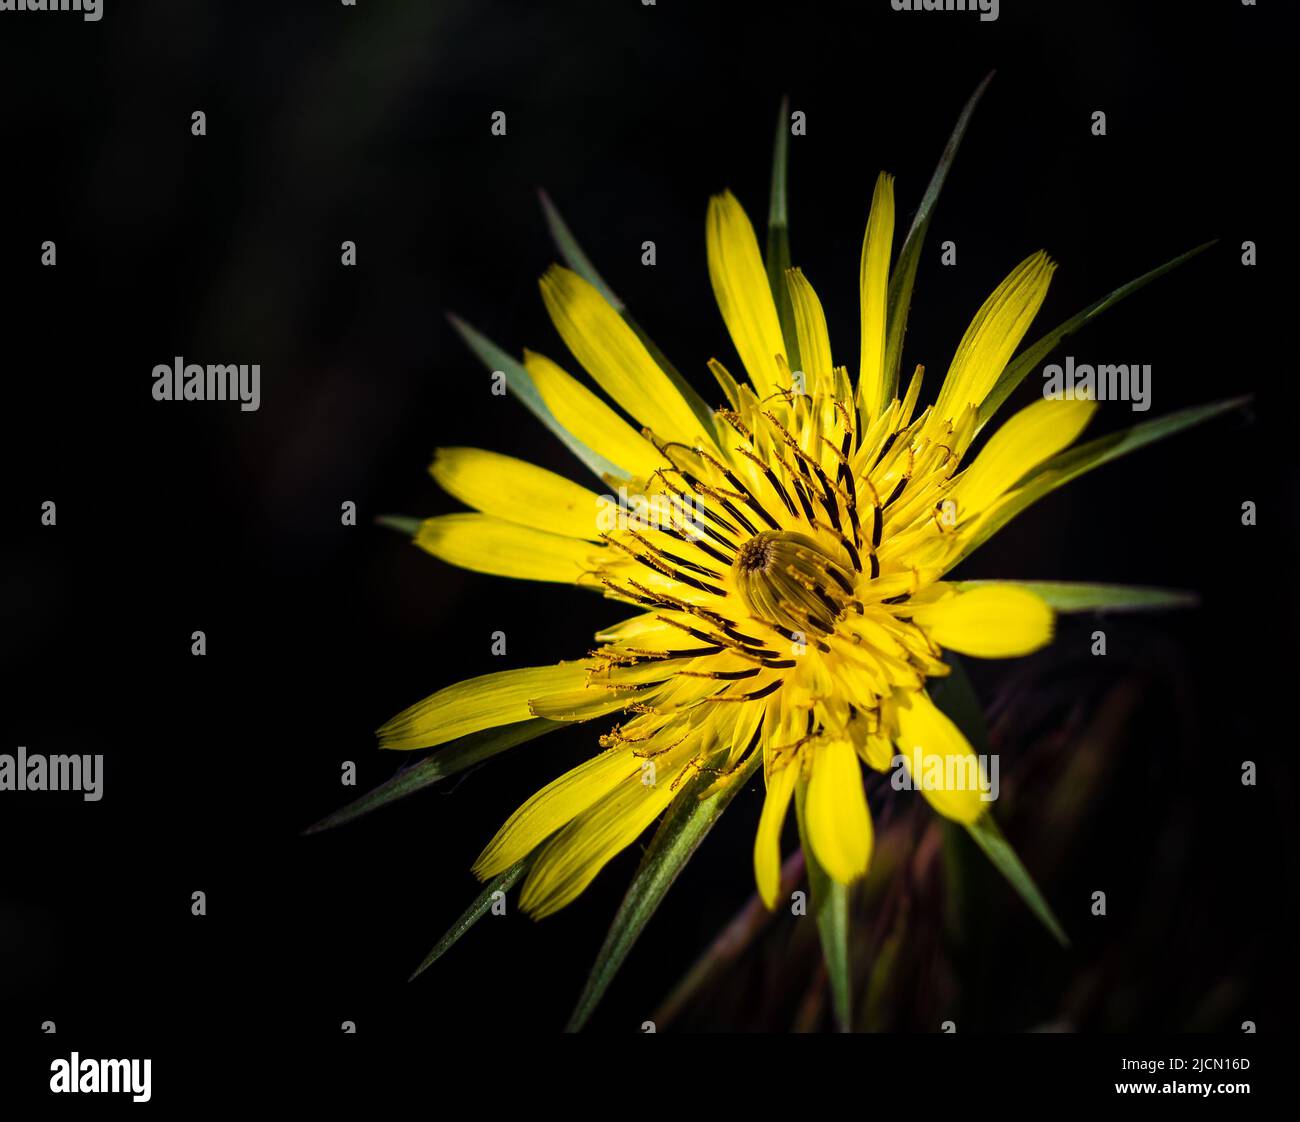 Meadow Salsify Tragopogon pratensis. The flower of yellow salsify. Tragopogon dubius. Blurred dark background, shallow depth of field, nobody, selecti Stock Photo